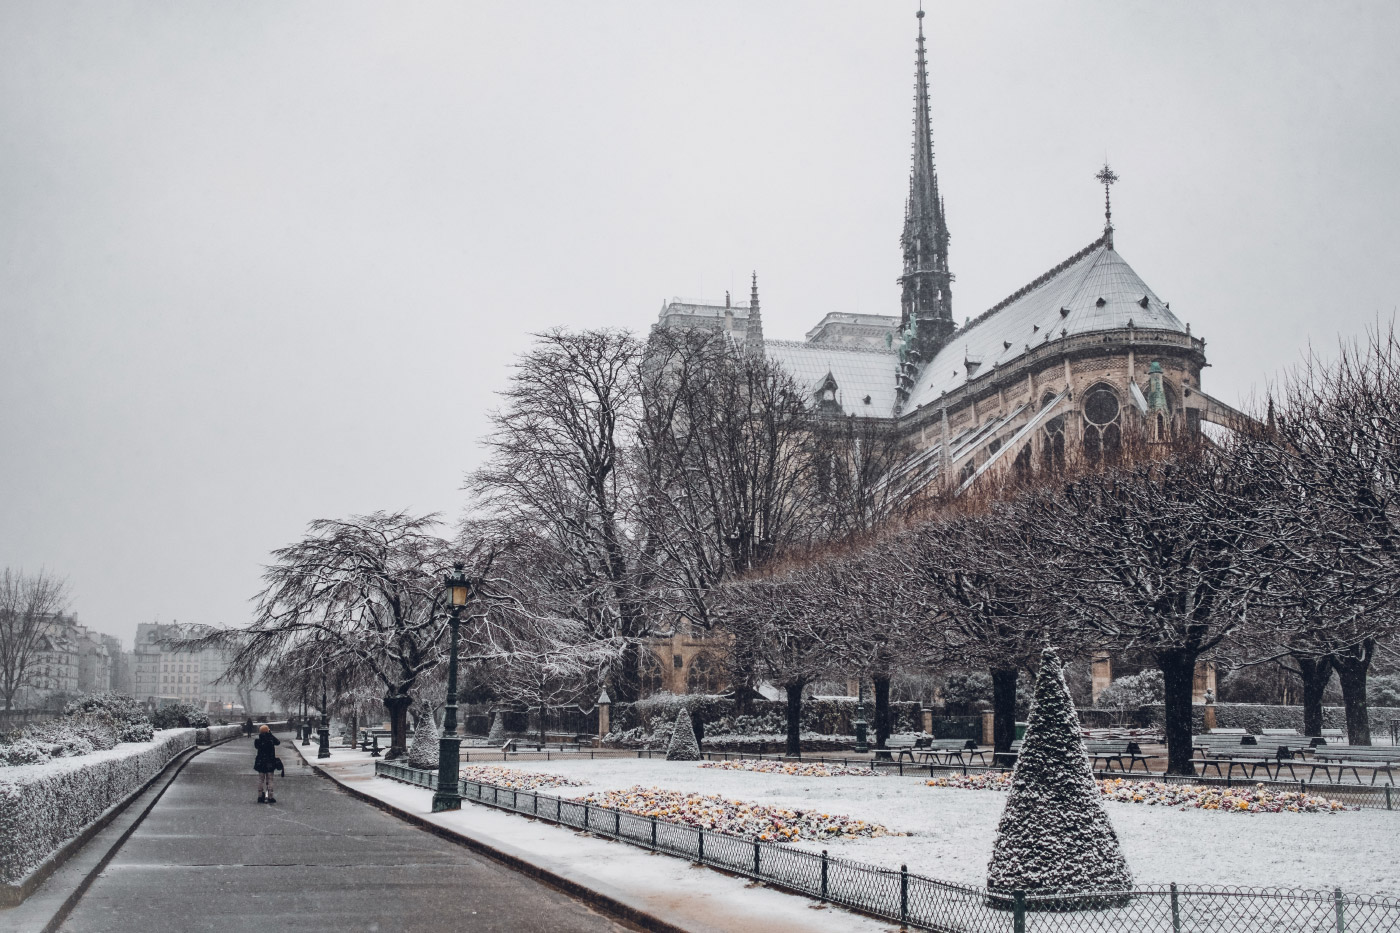 Photo of the Notre Dame cathedral in snow with a spire